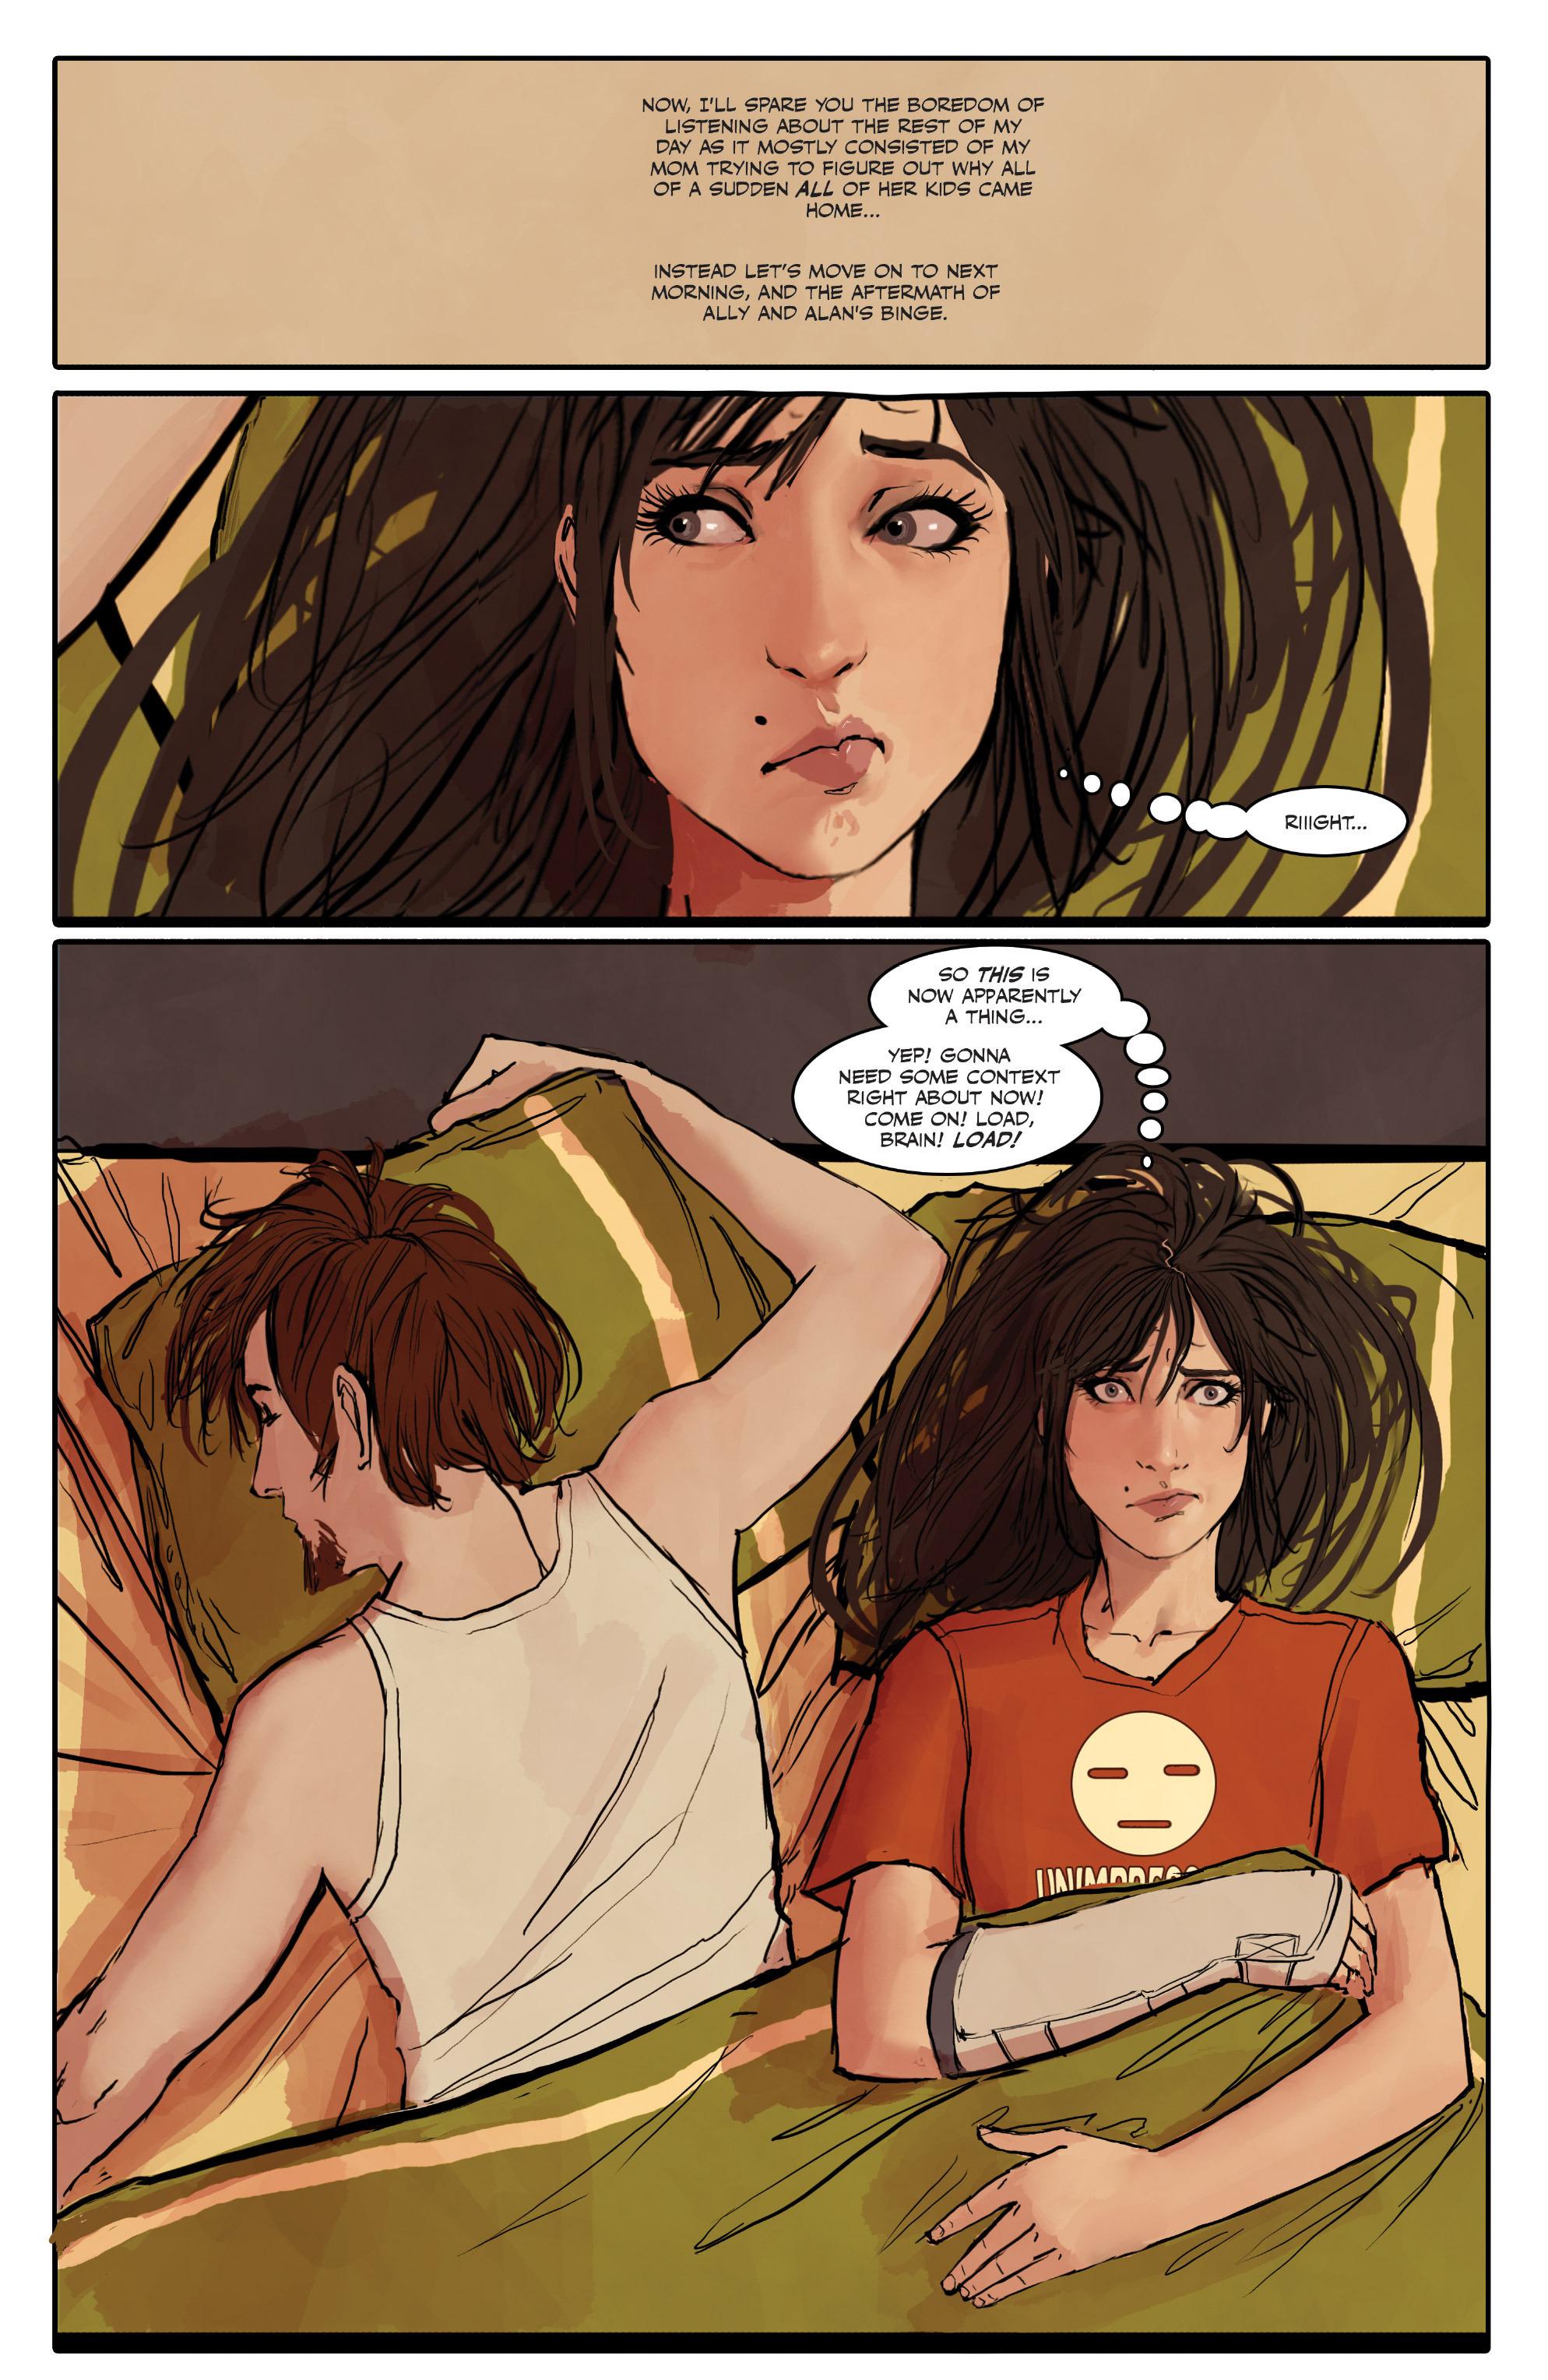 Sunstone Book 2 review